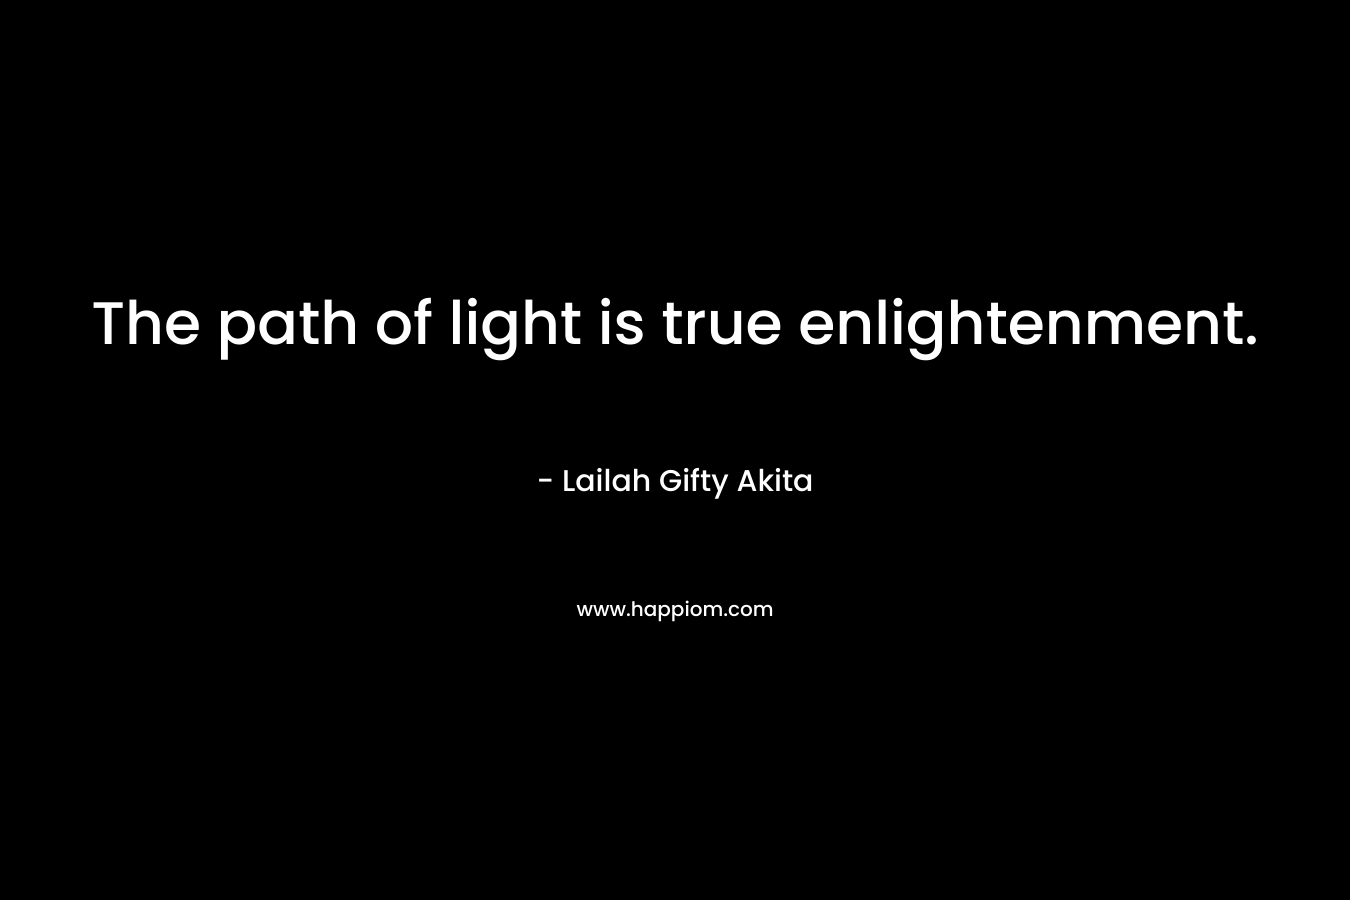 The path of light is true enlightenment.